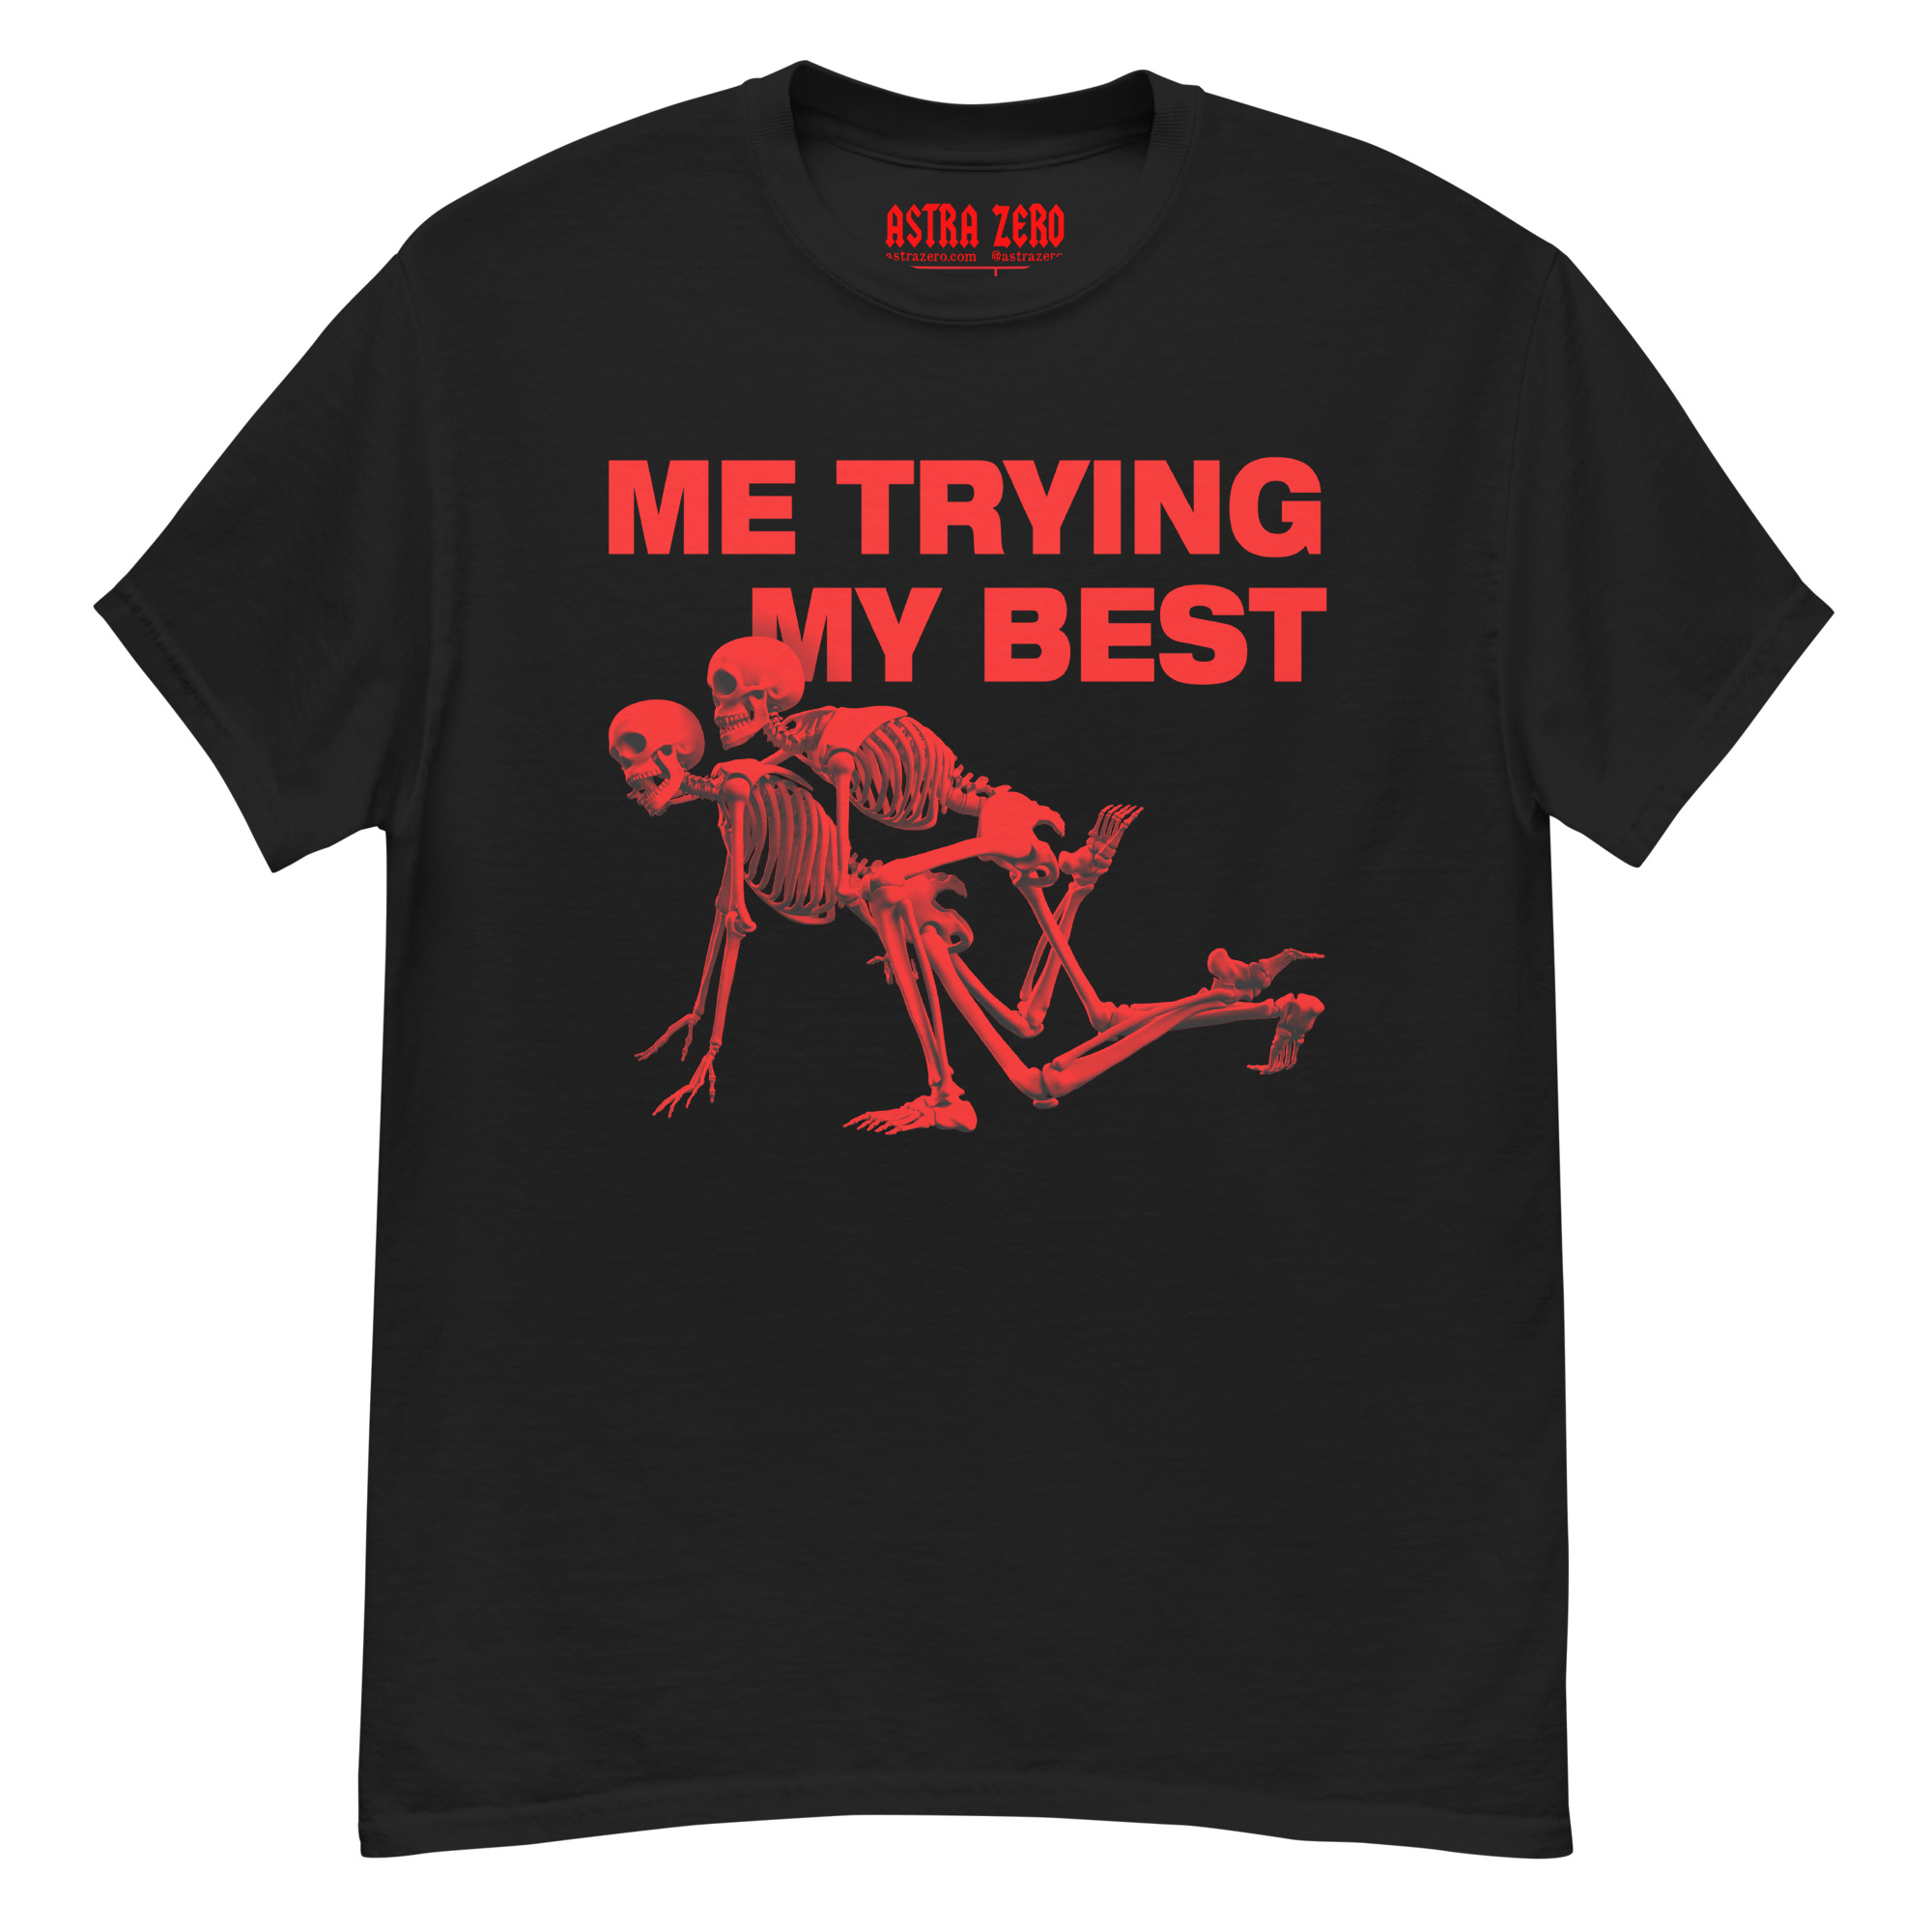 Featured image for “Me Trying My Best - Men's classic tee”